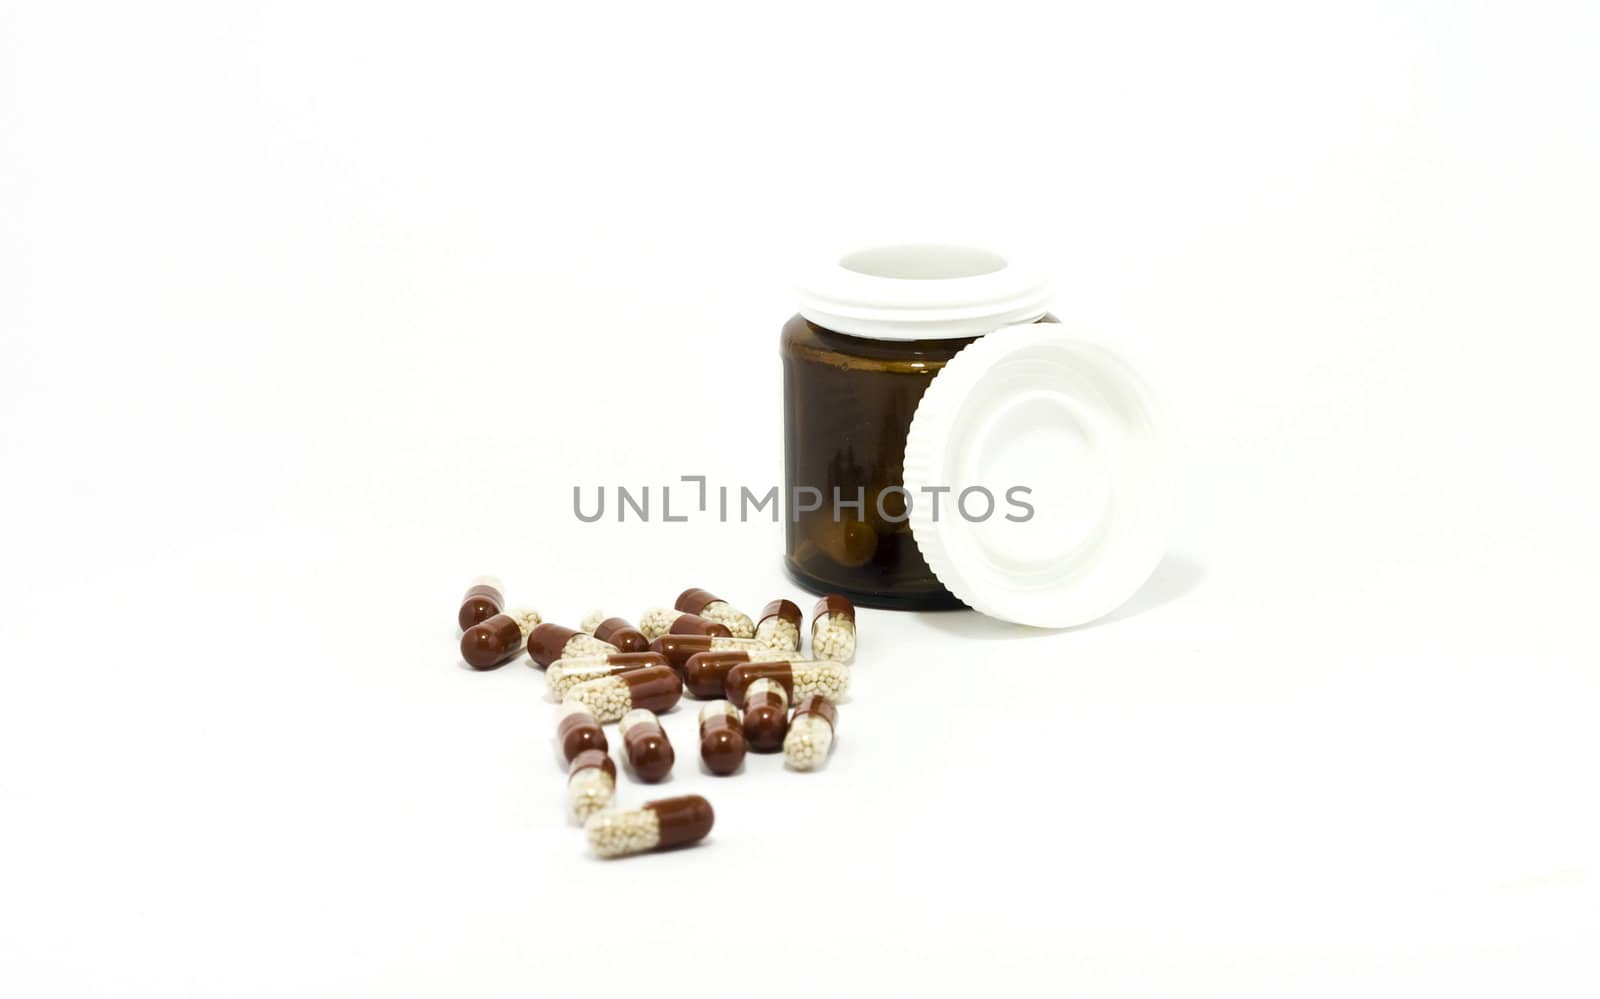 Pills and bottle on white background